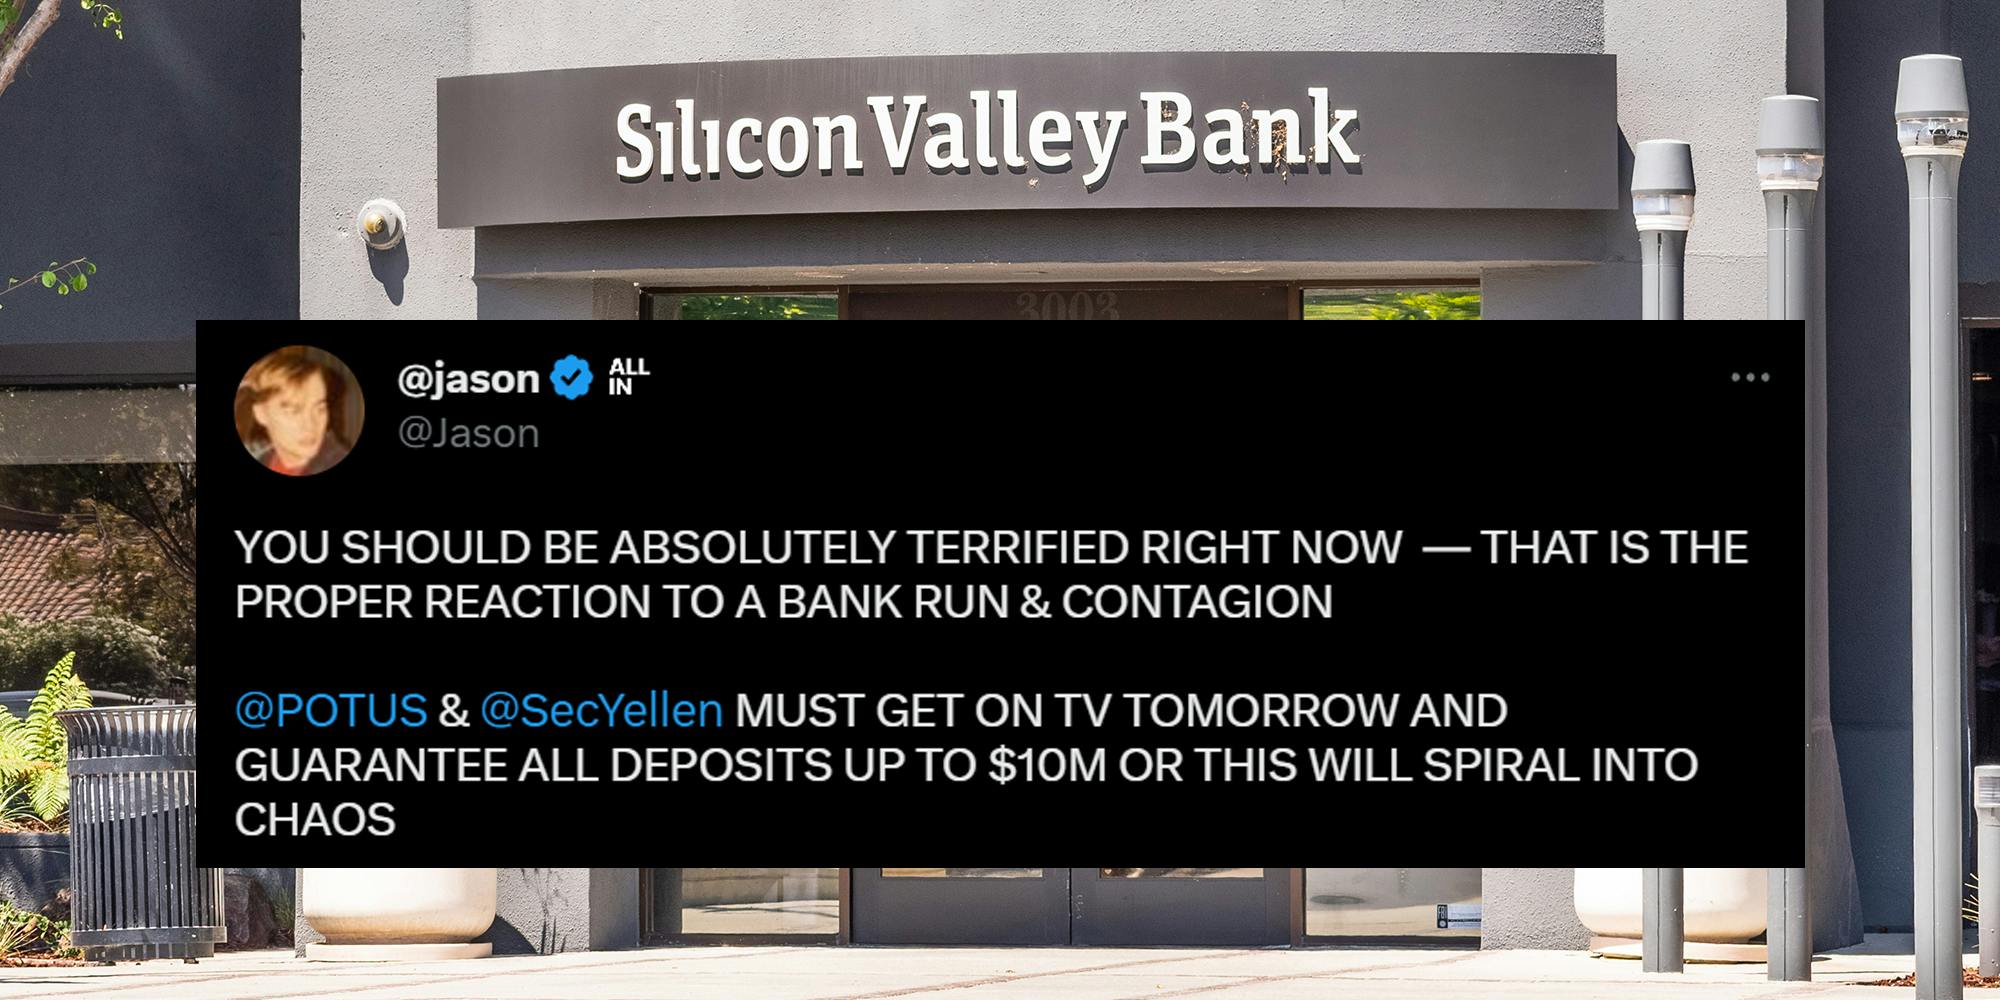 silicon valley bank entrance with tweet from @jason "YOU SHOULD BE ABSOLUTELY TERRIFIED RIGHT NOW - THAT IS THE PROPER REACTION TO A BANK RUN & CONTAGION. @POTUS % @SECYELLEN MUST GET ON TV TOMORROW AND GUARANTEE ALL DEPOSITS UP TO $10m OR THIS WILL SPIRAL INTO CHAOS"